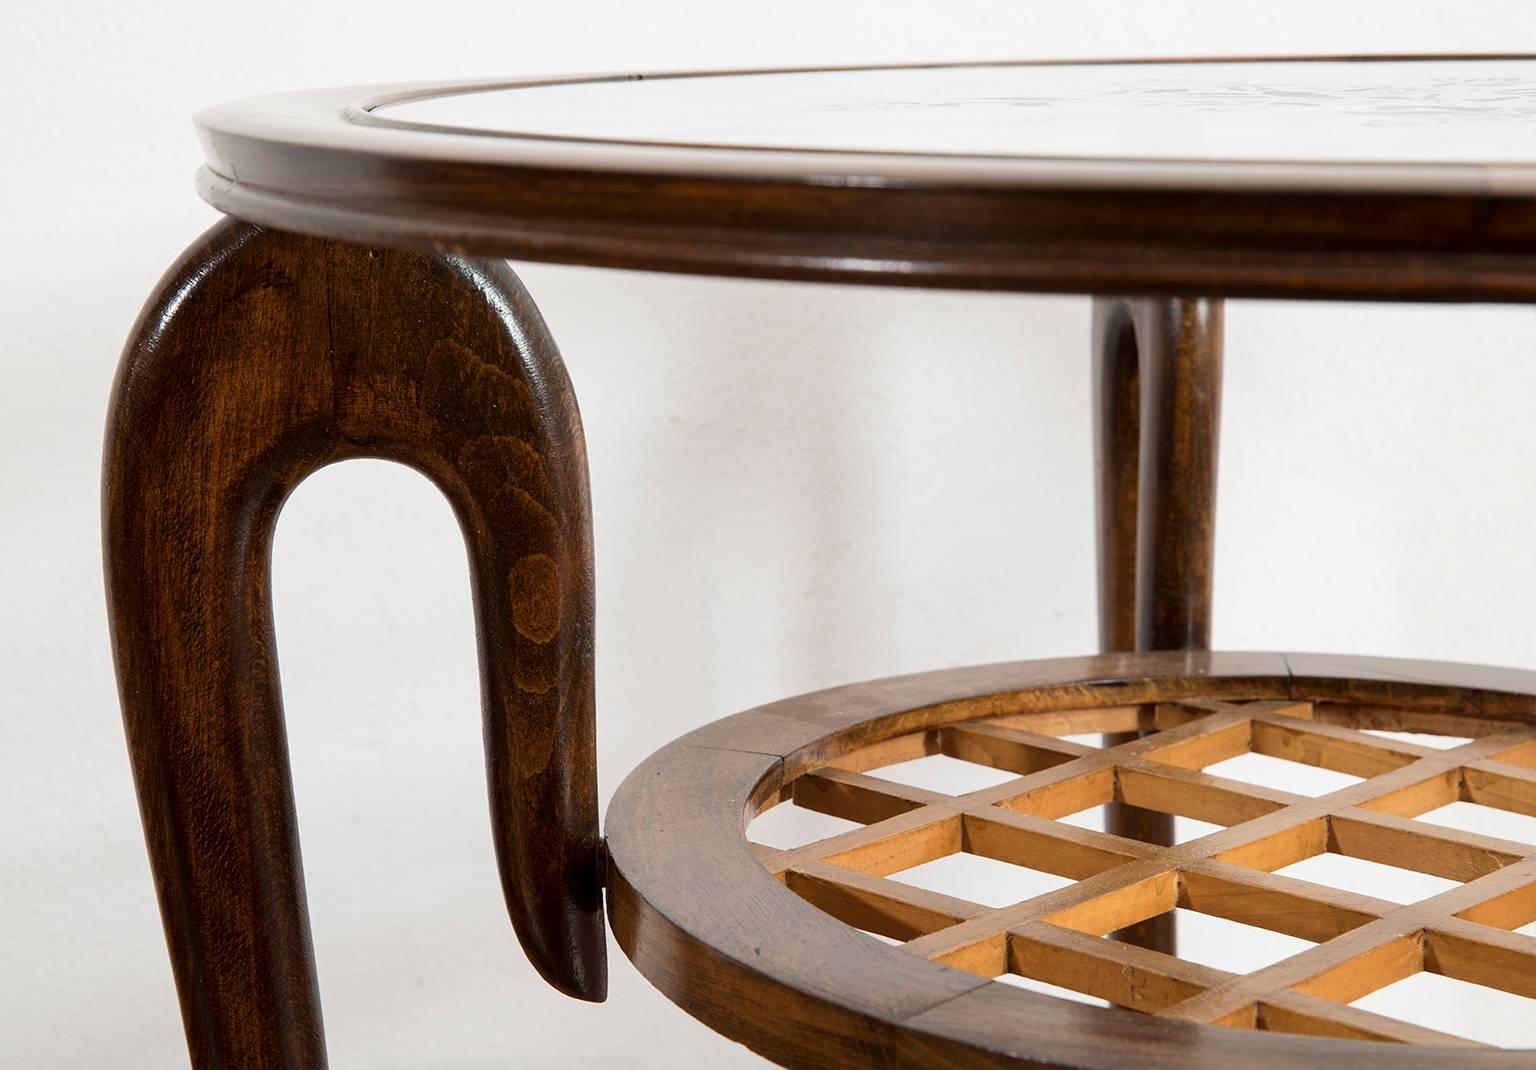 1940s coffee table